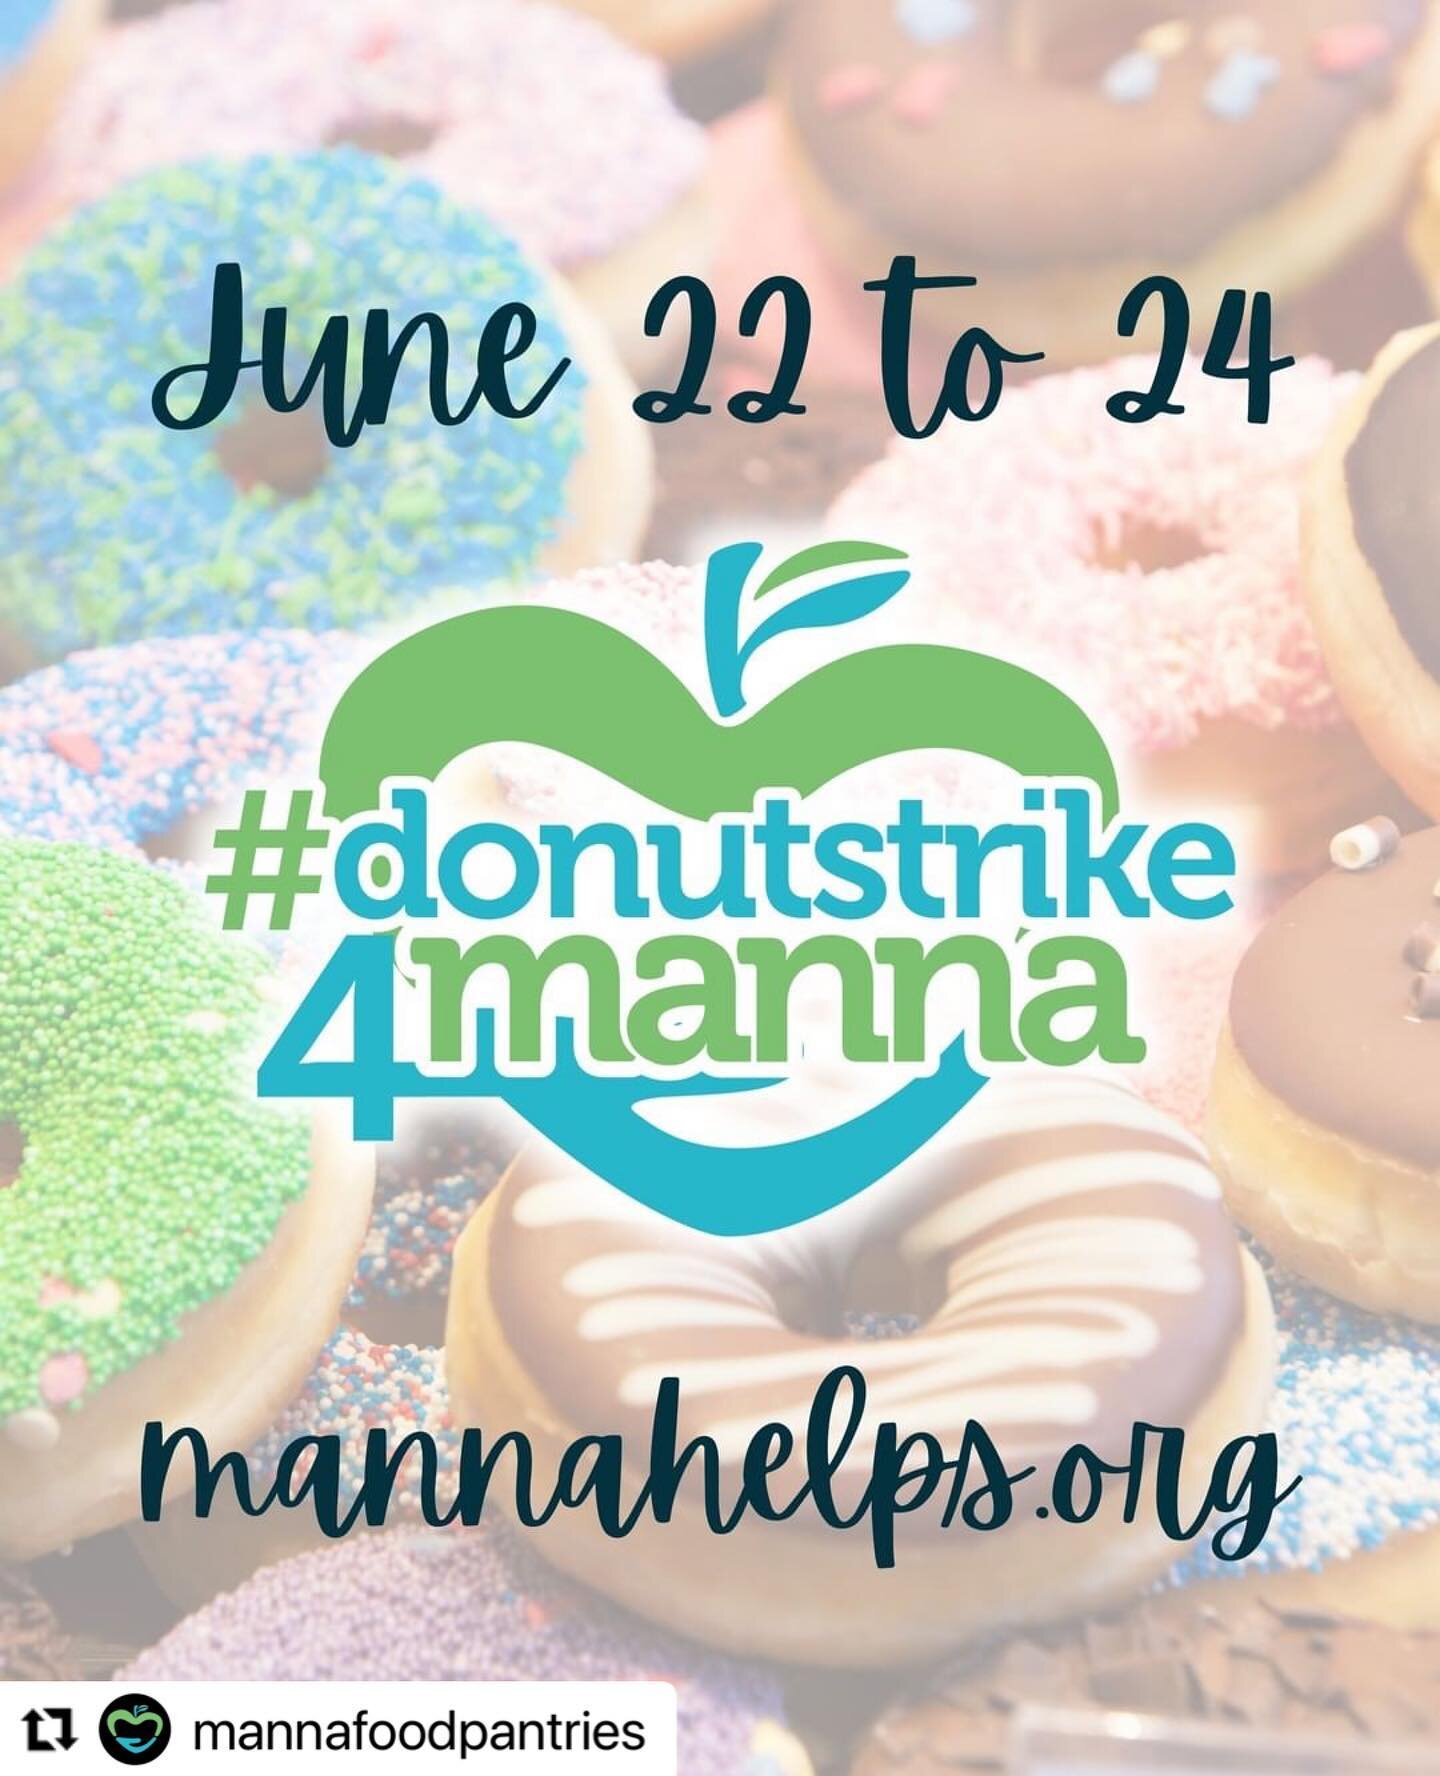 🍩 The #donutstrike4manna food drive is June 22-24! 🍩

During the Donut Strike, local first responders have vowed not to devour a single donut until thousands of pounds of food have been donated to fight hunger in Escambia and Santa Rosa counties. T